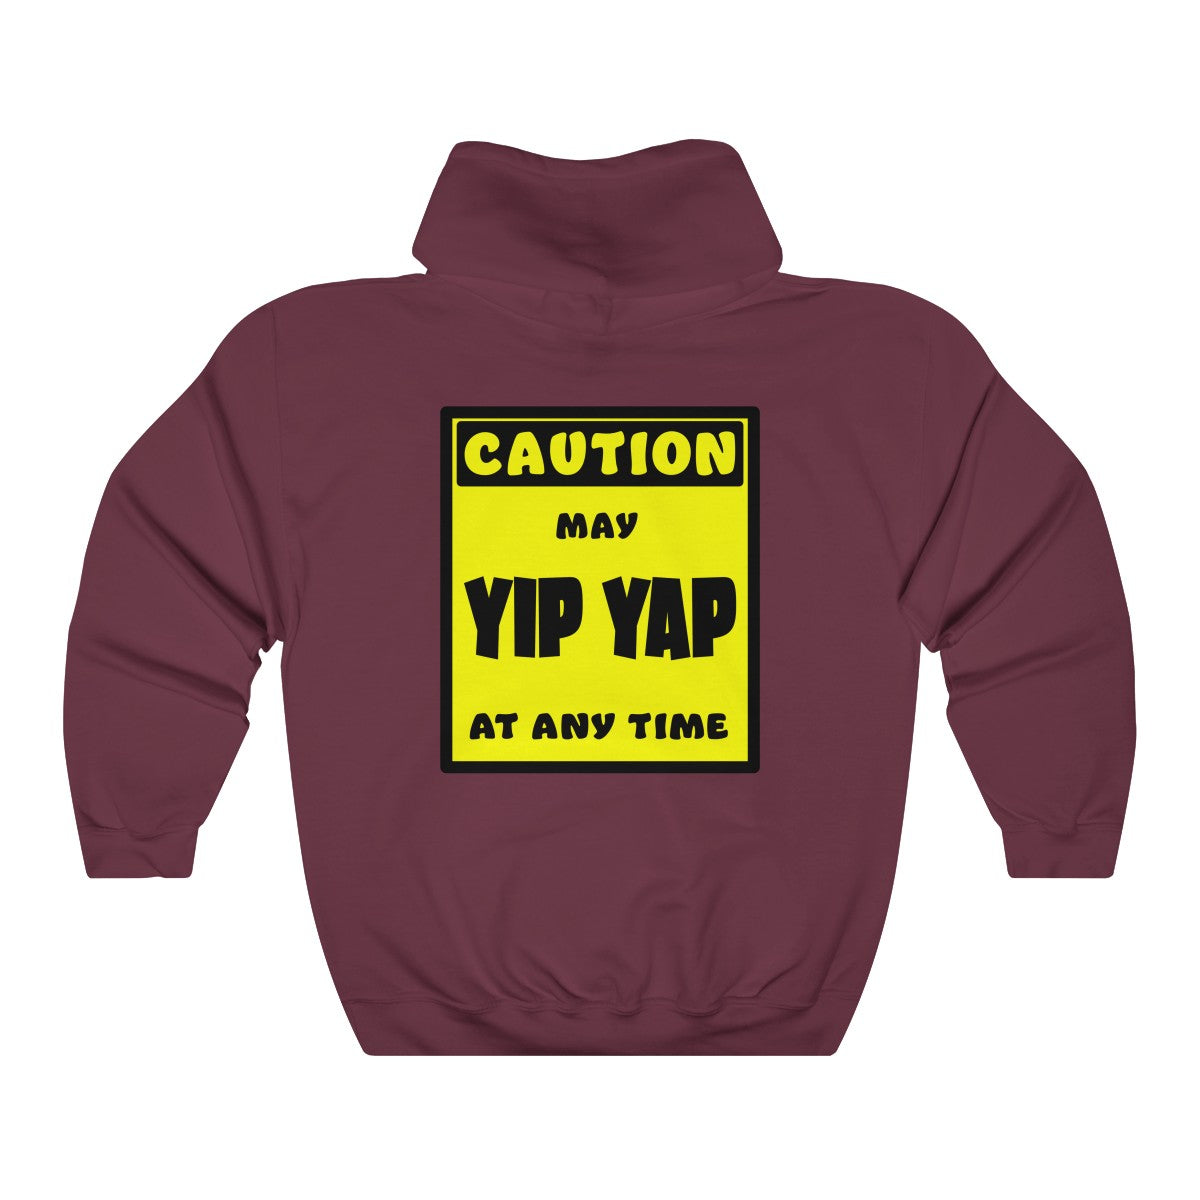 CAUTION! May Yip Yap at any time! - Hoodie Hoodie AFLT-Whootorca Maroon S 